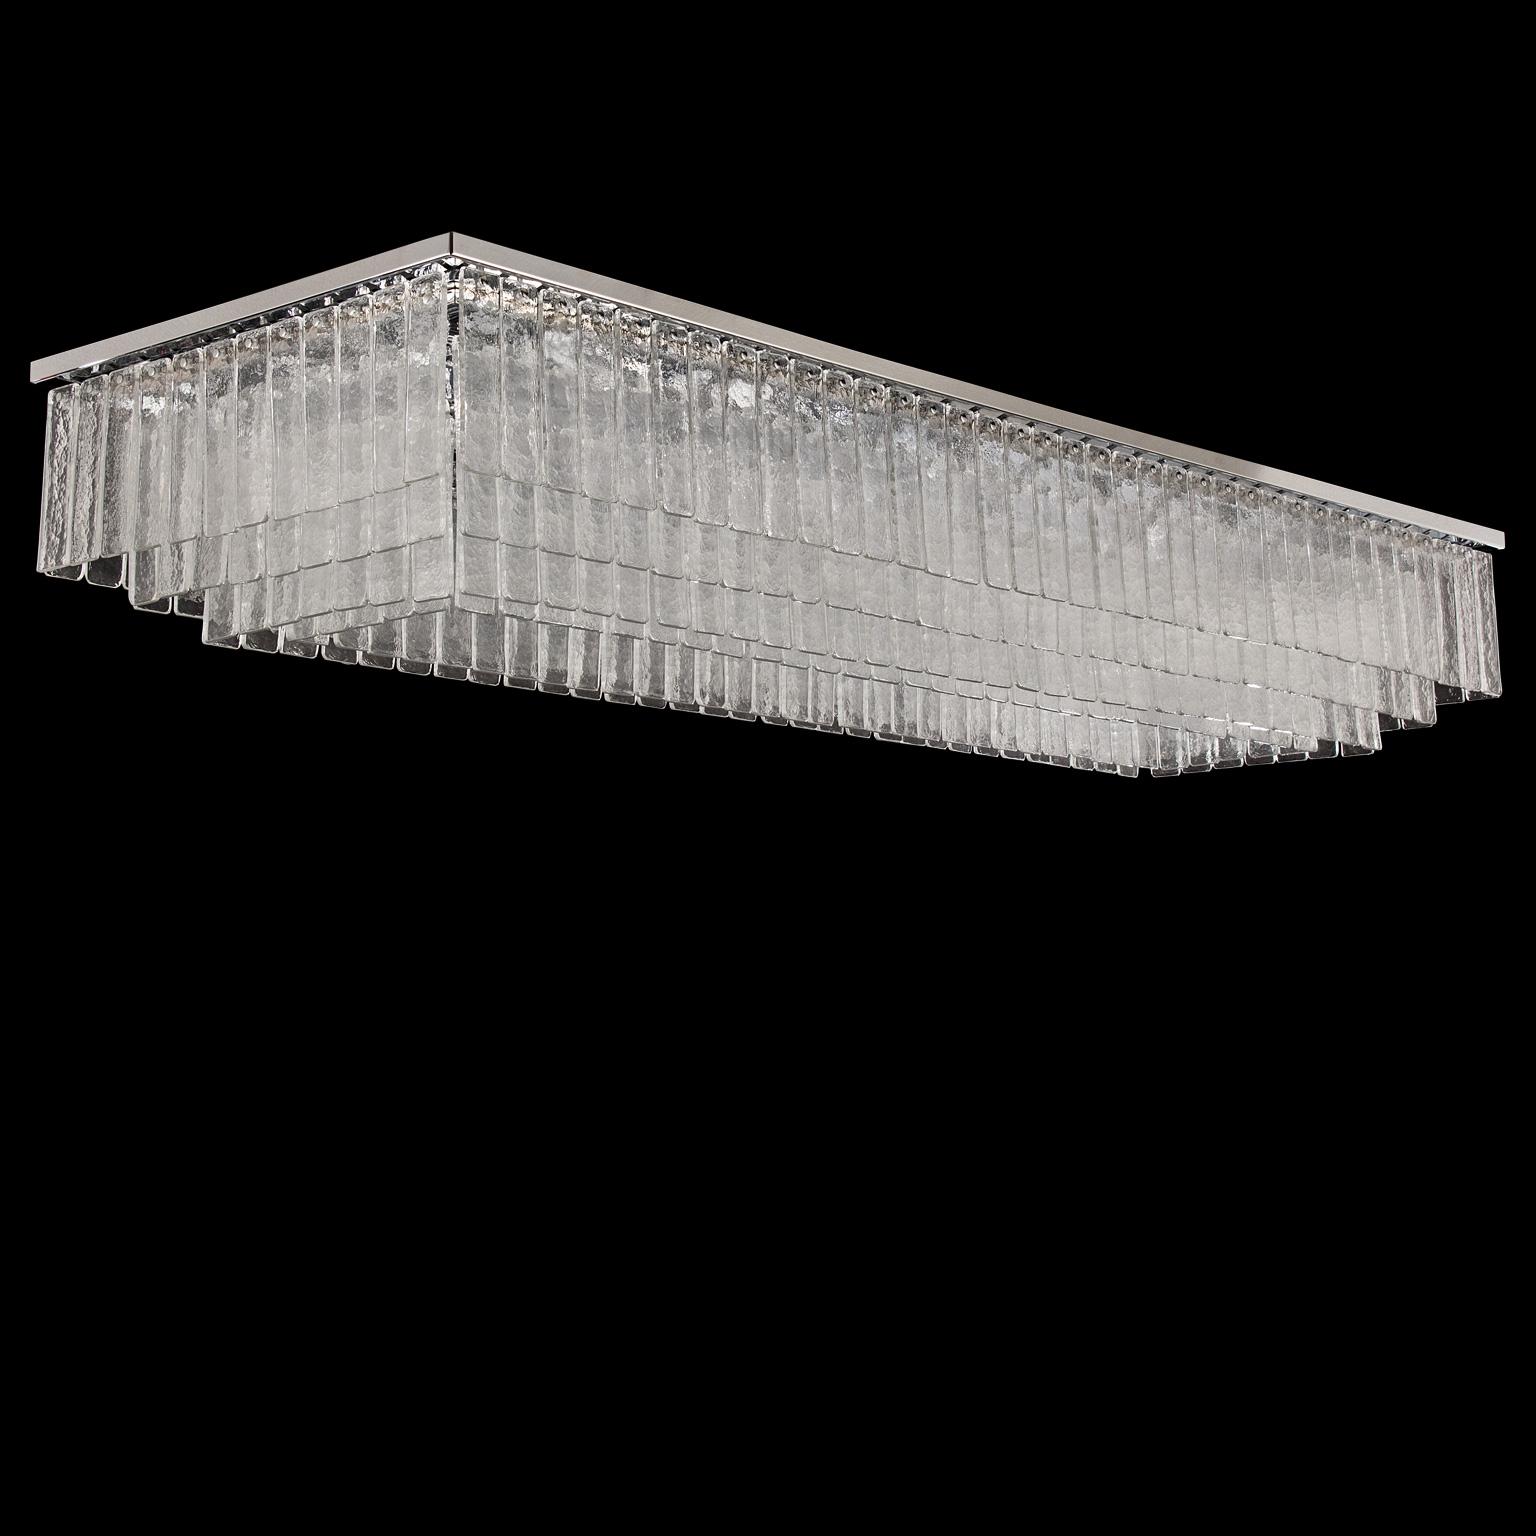 The modern style ceiling light Charleston, from our Progressive collection, is an extremely versatile lighting work that can be customized in many different sizes and colors.
Charleston is characterized by essential modular shapes, the module is a